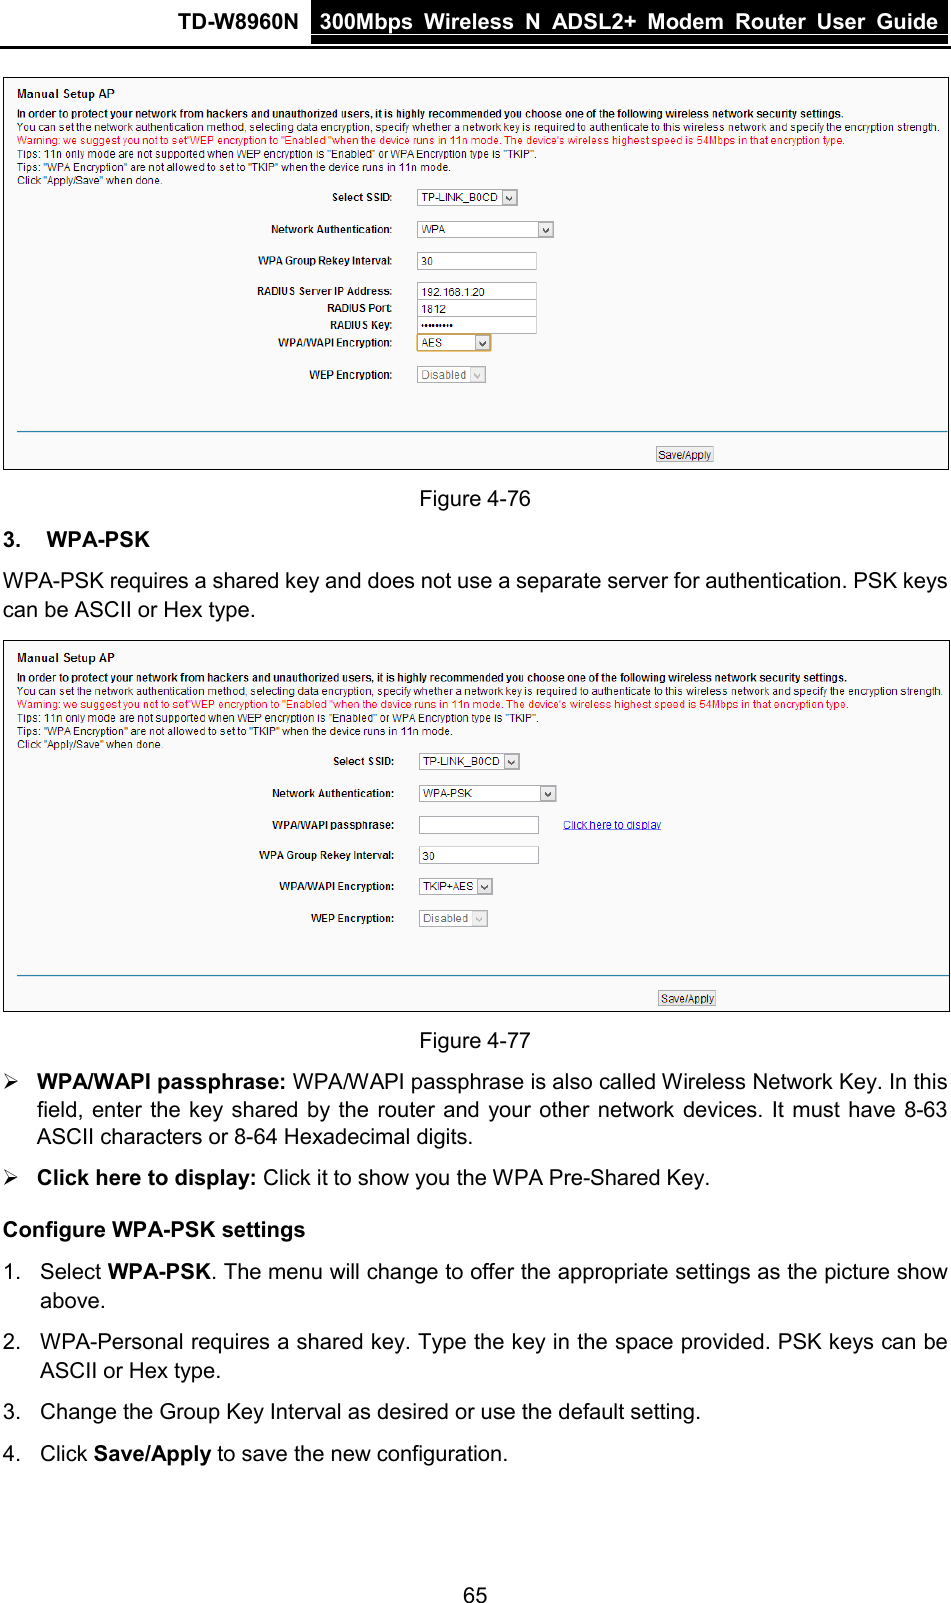 TD-W8960N 300Mbps Wireless  N  ADSL2+ Modem  Router  User Guide  65  Figure 4-76 3. WPA-PSK WPA-PSK requires a shared key and does not use a separate server for authentication. PSK keys can be ASCII or Hex type.  Figure 4-77  WPA/WAPI passphrase: WPA/WAPI passphrase is also called Wireless Network Key. In this field, enter the key shared by the router and your other network devices. It must have 8-63 ASCII characters or 8-64 Hexadecimal digits.  Click here to display: Click it to show you the WPA Pre-Shared Key. Configure WPA-PSK settings 1.  Select WPA-PSK. The menu will change to offer the appropriate settings as the picture show above. 2. WPA-Personal requires a shared key. Type the key in the space provided. PSK keys can be ASCII or Hex type. 3. Change the Group Key Interval as desired or use the default setting. 4. Click Save/Apply to save the new configuration. 